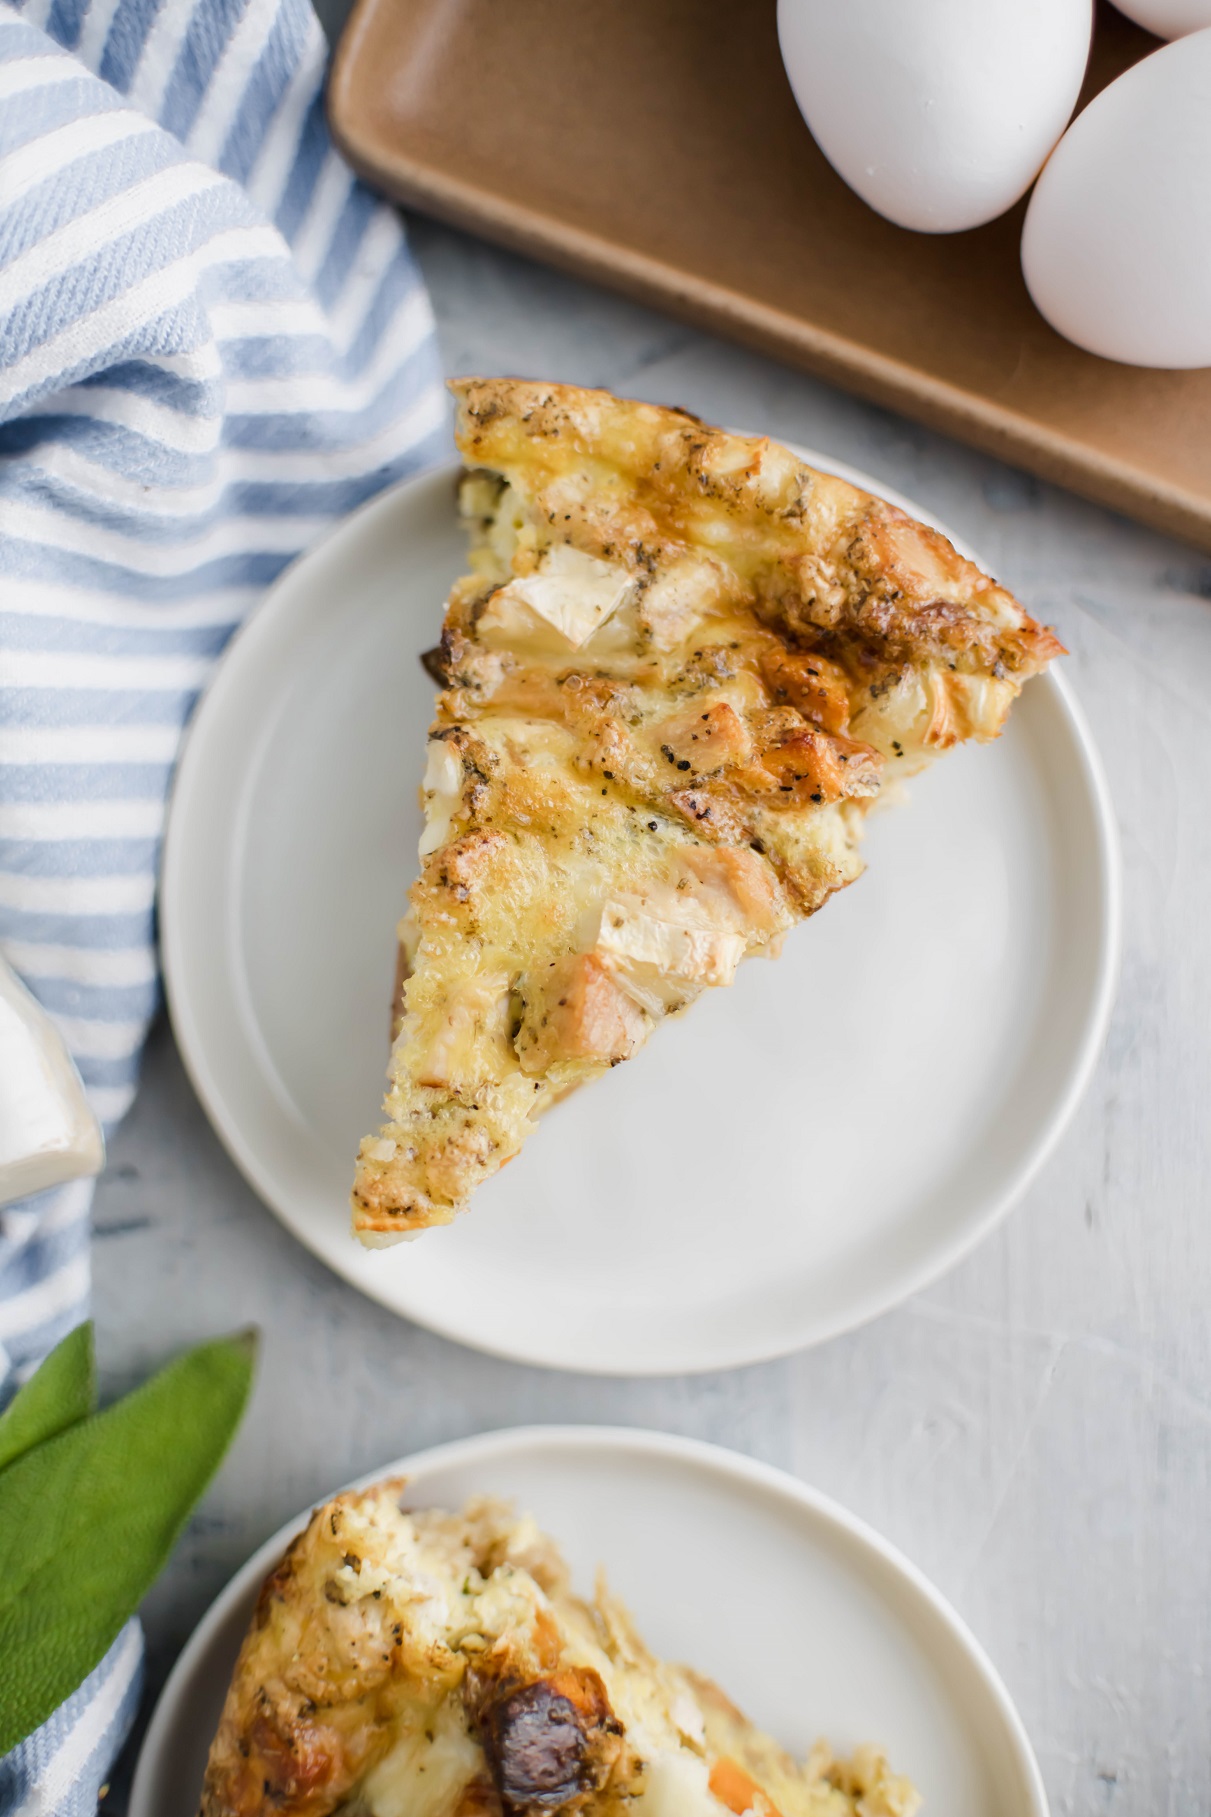 Put those delicious Thanksgiving leftovers to use and make this Thanksgiving Turkey Frittata for brunch. With a stuffing crust, it's packed with juicy turkey, tender sweet potatoes and chunks of brie cheese.